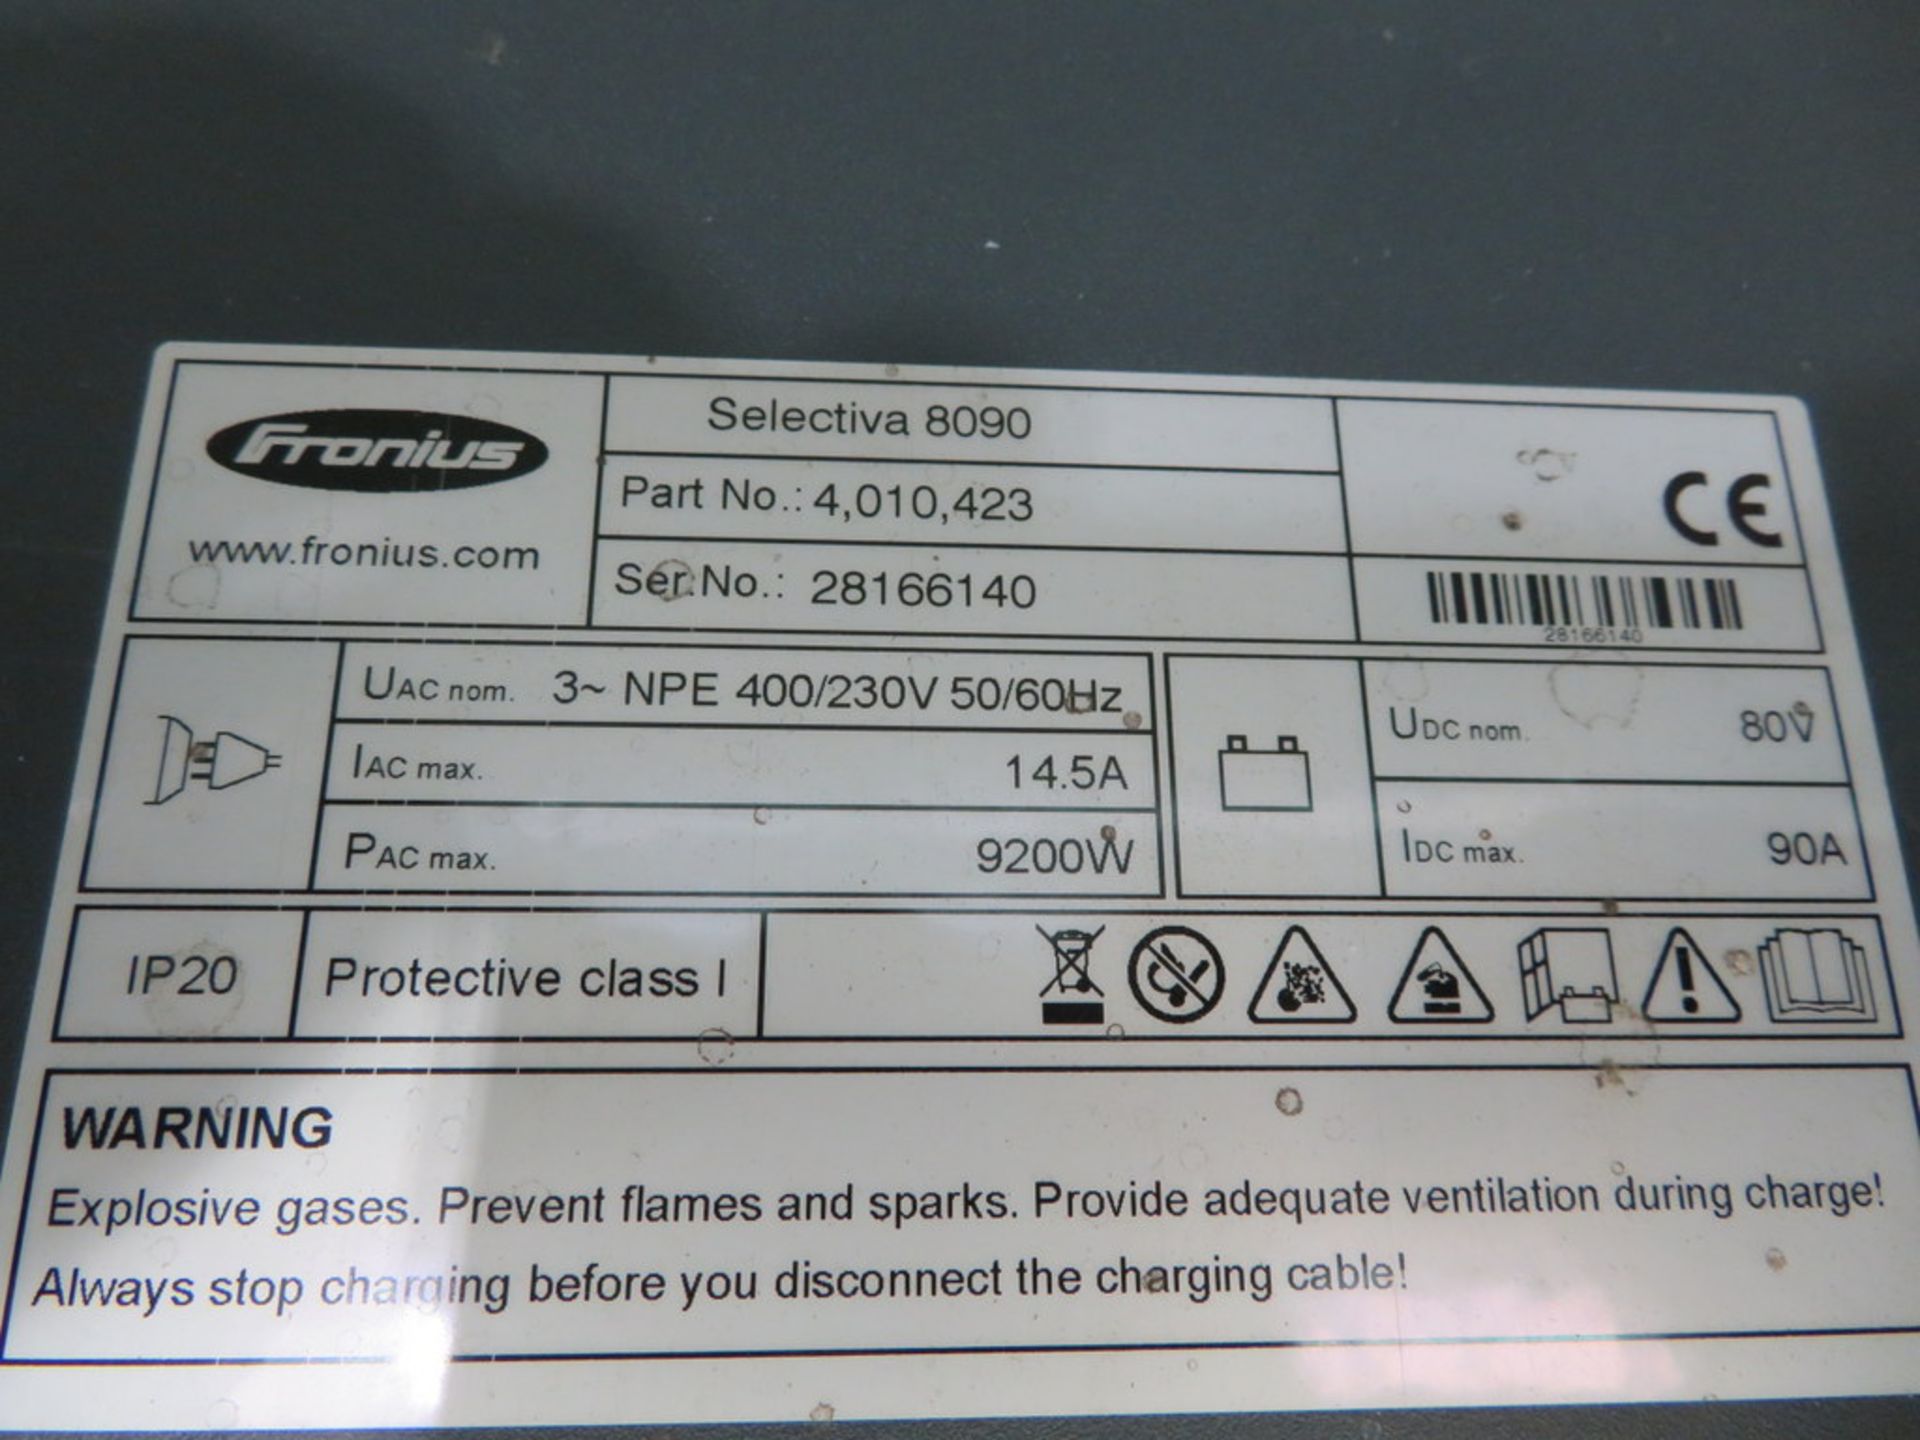 FRONIUS SELECTIVA 8090 8KW - 80V BATTERY CHARGER; SERIAL NO 28166140 - Image 2 of 2